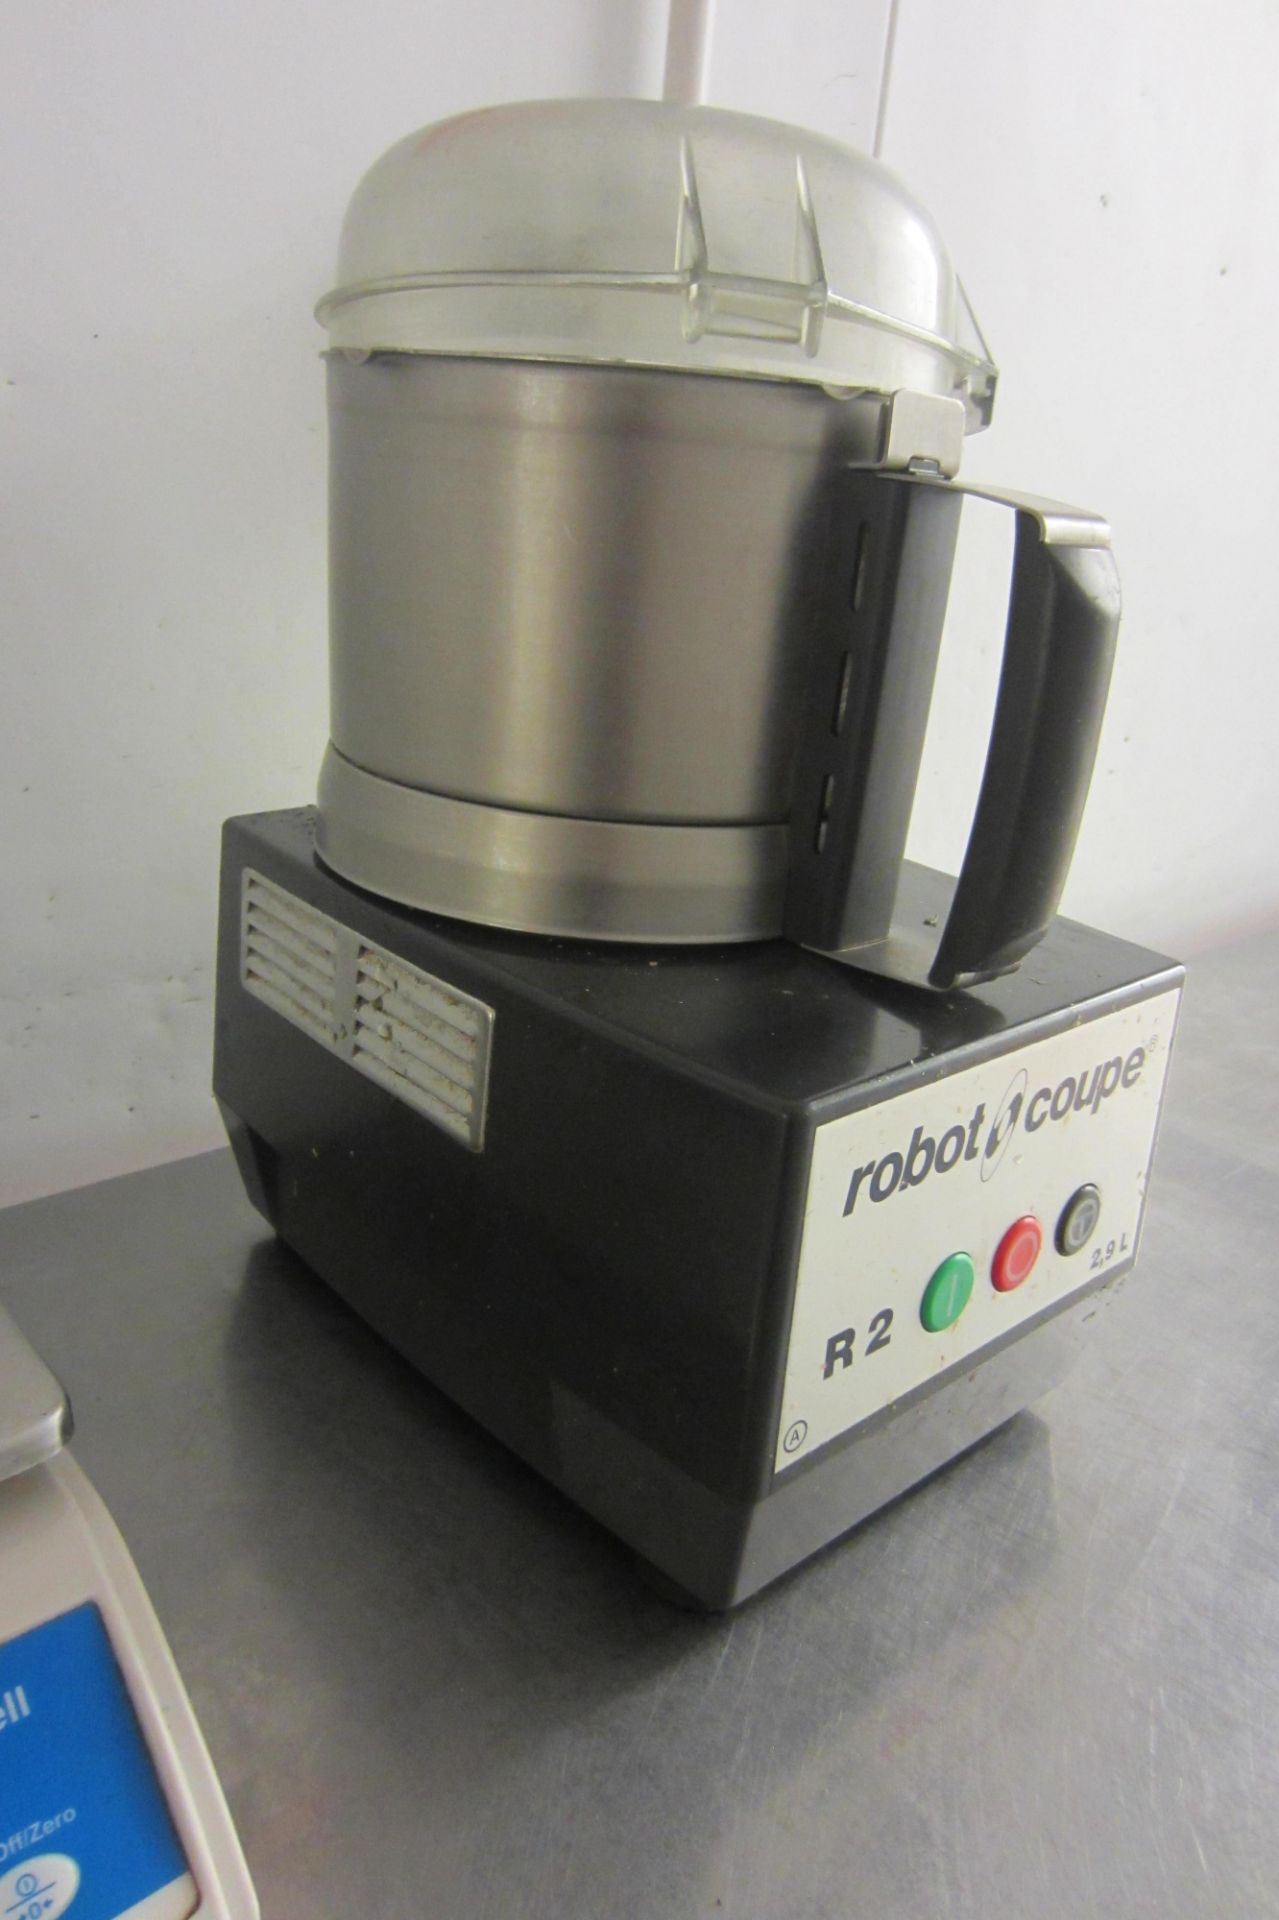 Robot Coupe R2 Blender (NOTE: Failed Safety) and a Set of Brecknell Weighing Scales. - Image 2 of 5